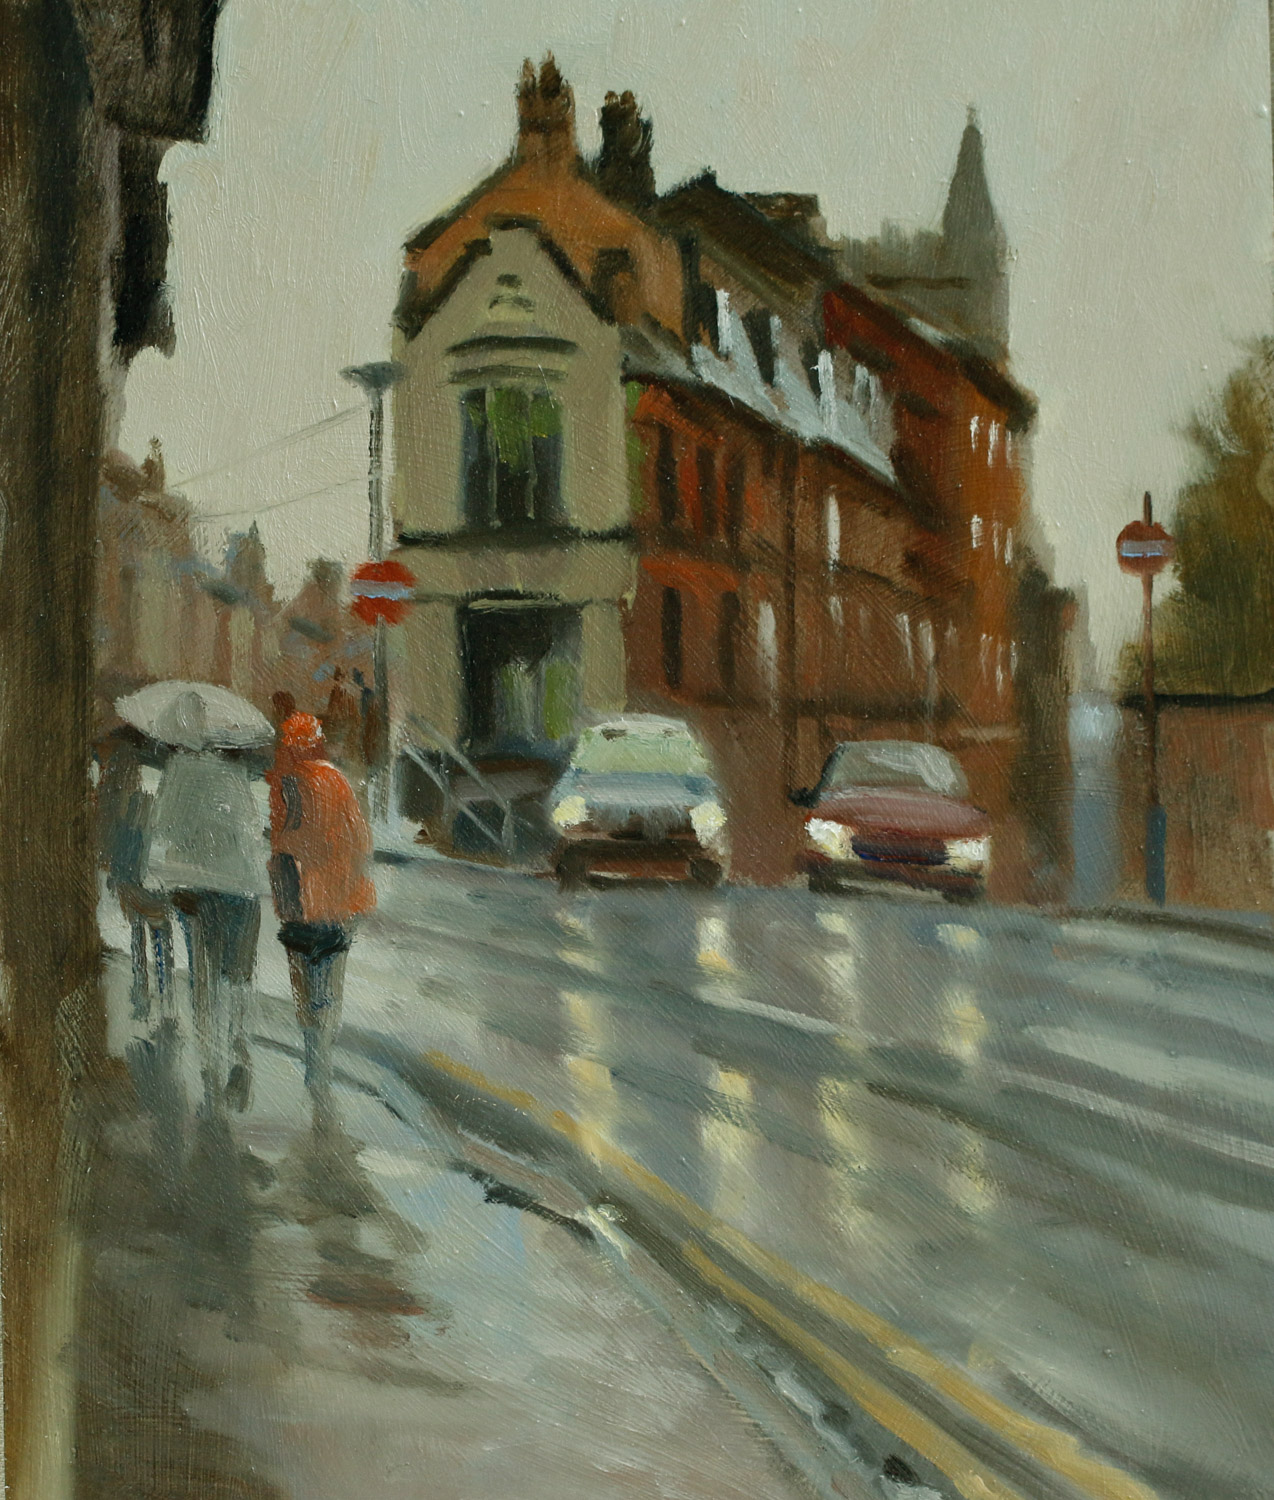 Artist Michael Richardson - Wet Morning, St Benedict Street 12x16 Oil on Board at Paint Out Norwich 2015